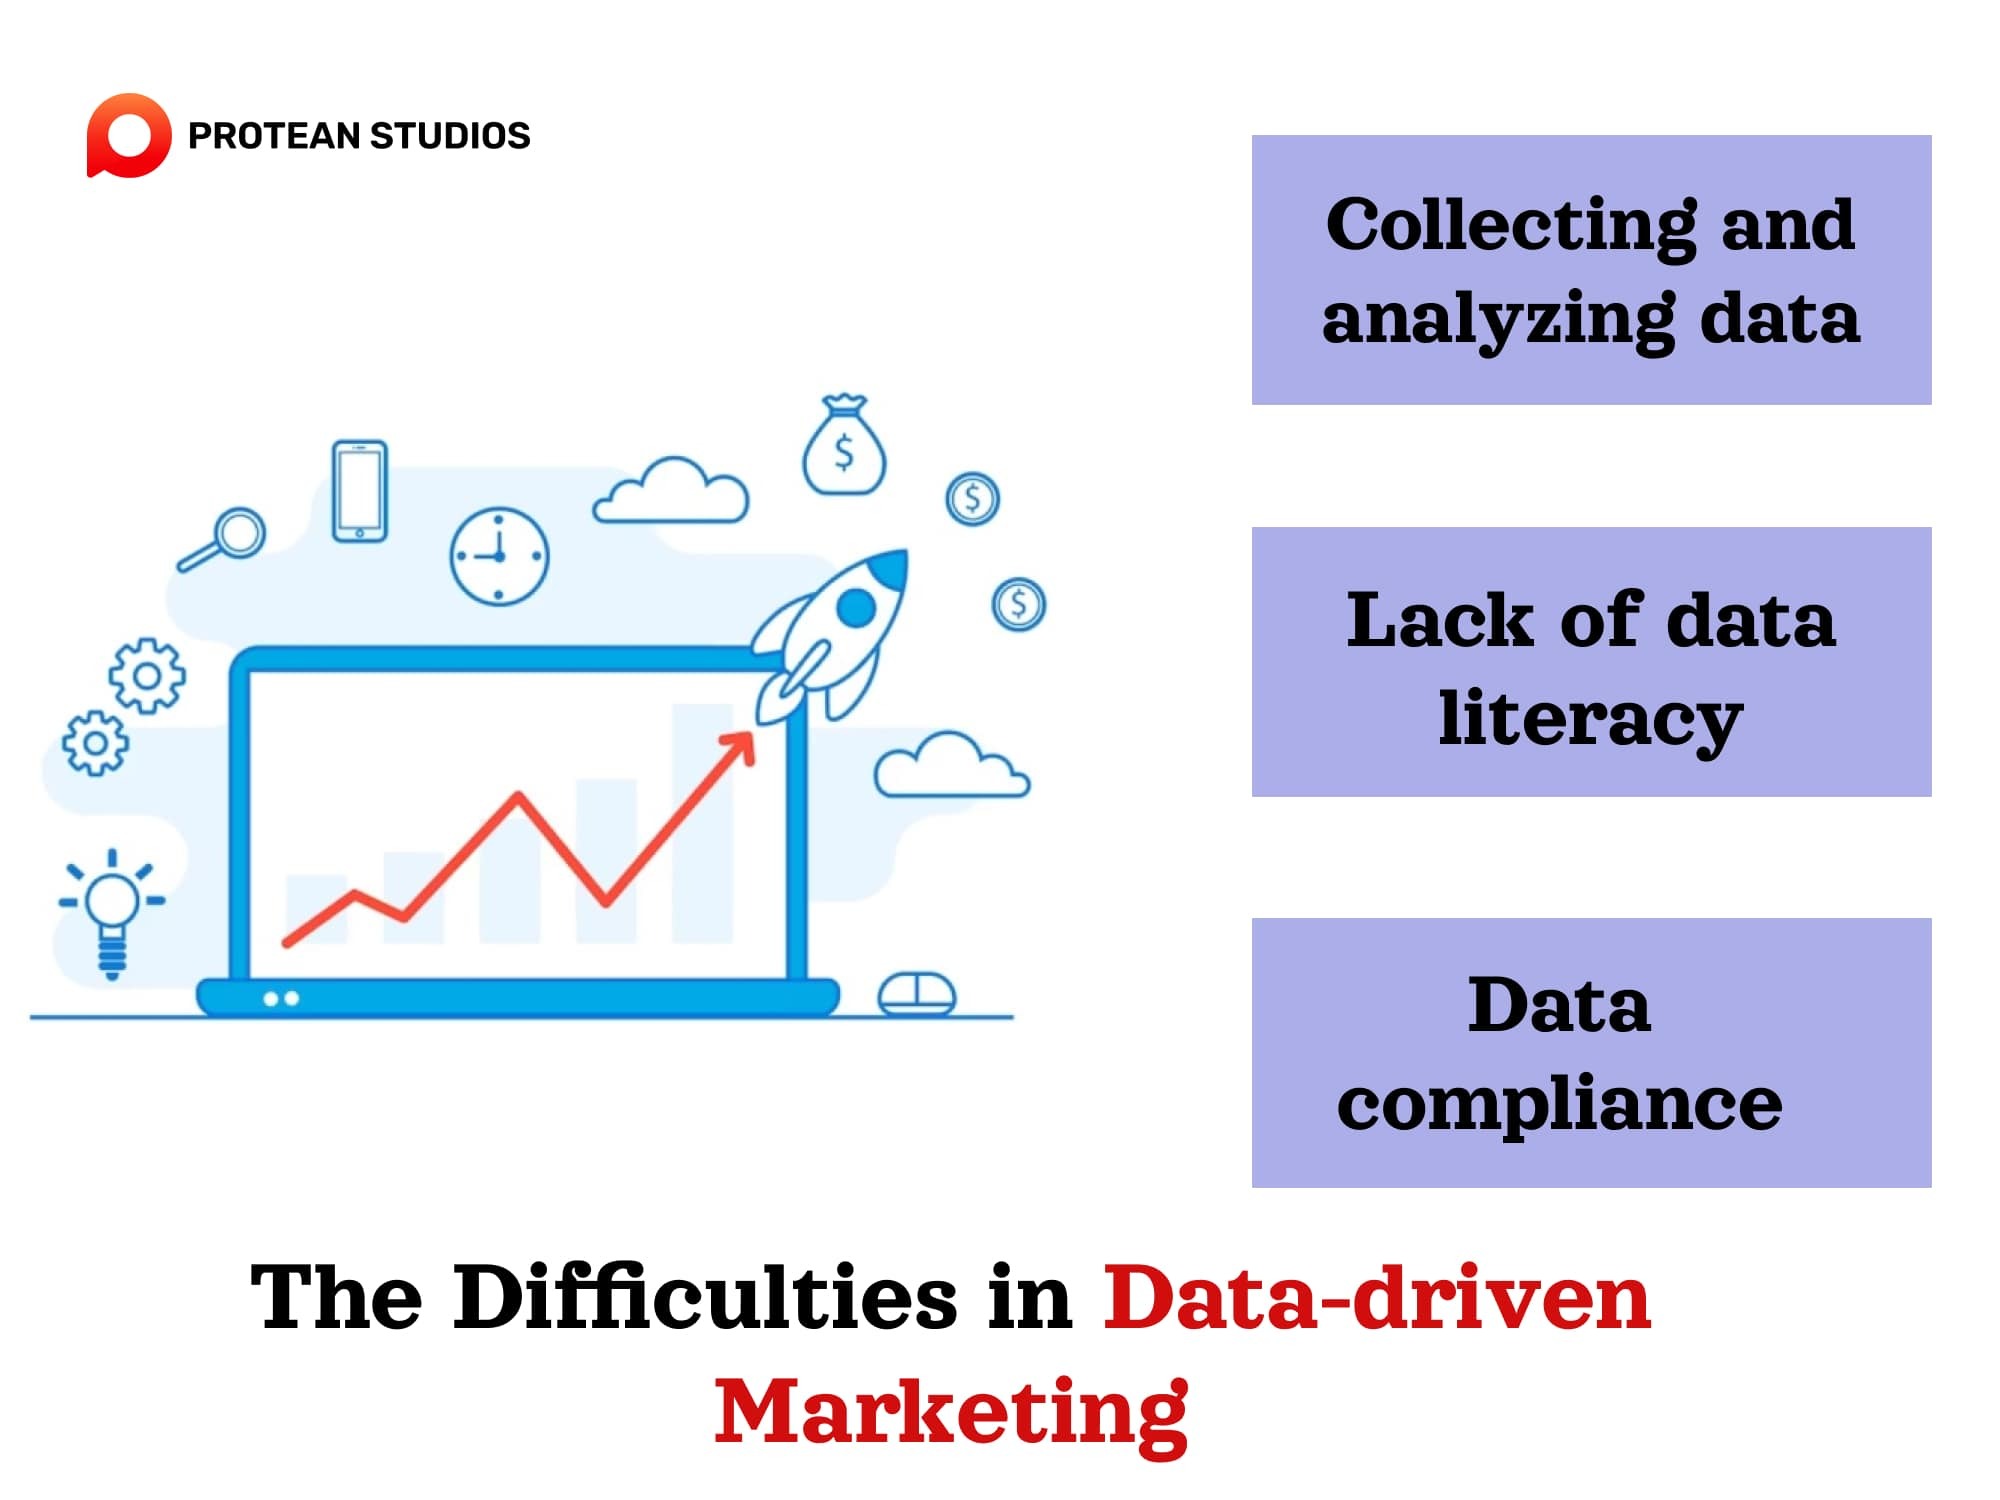 Collecting the data is a difficulty for marketers